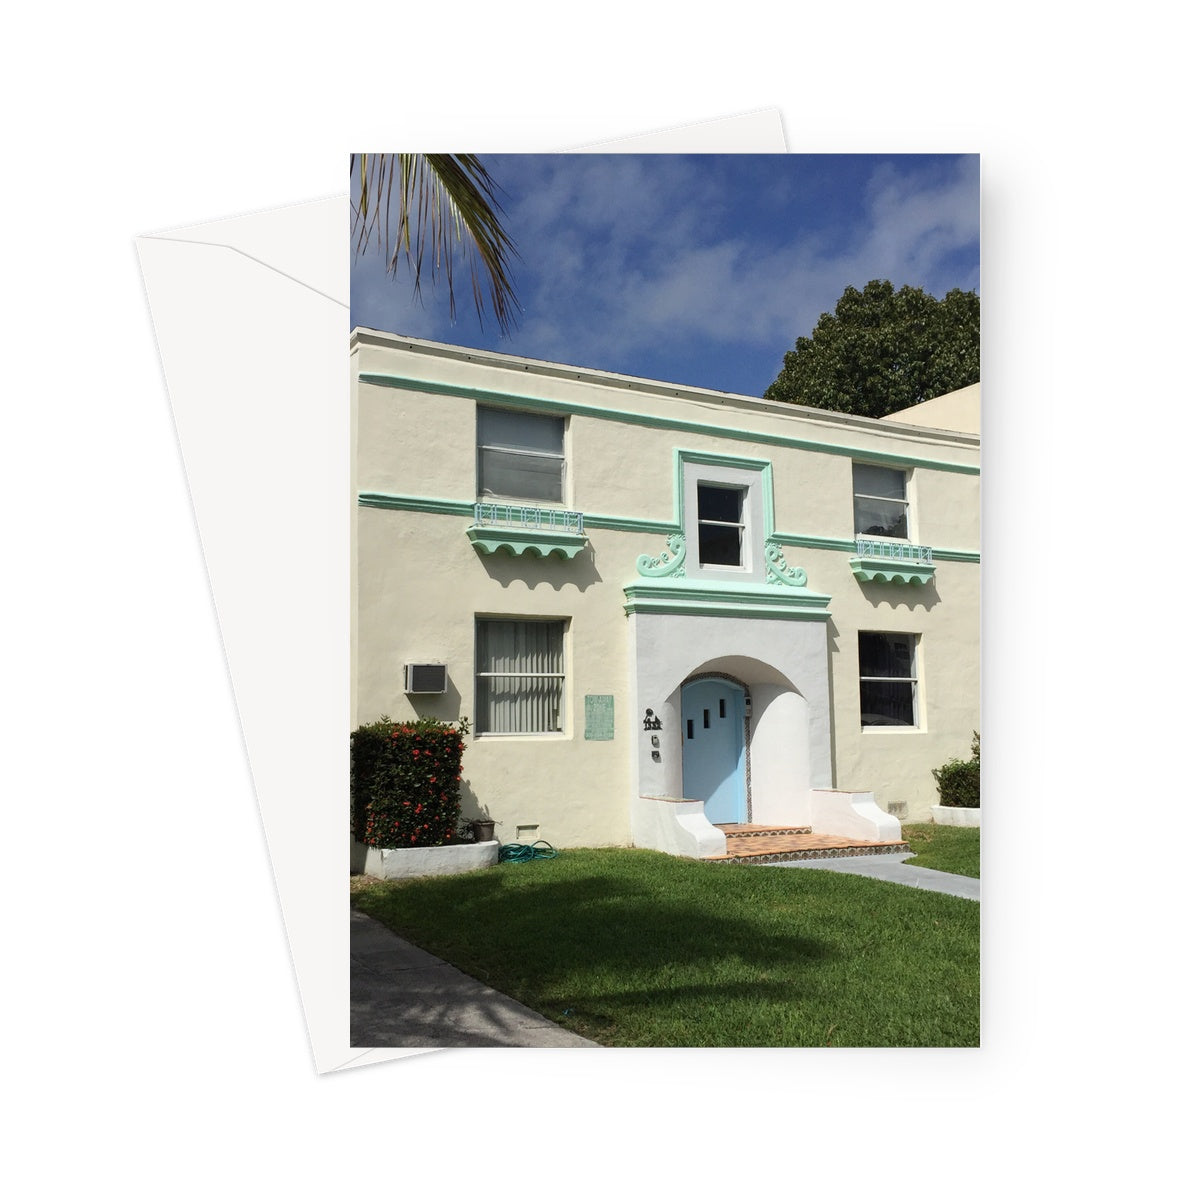 Greeting card shows a pale yellow Art Deco building with pale green scalloped features and pale blue front door